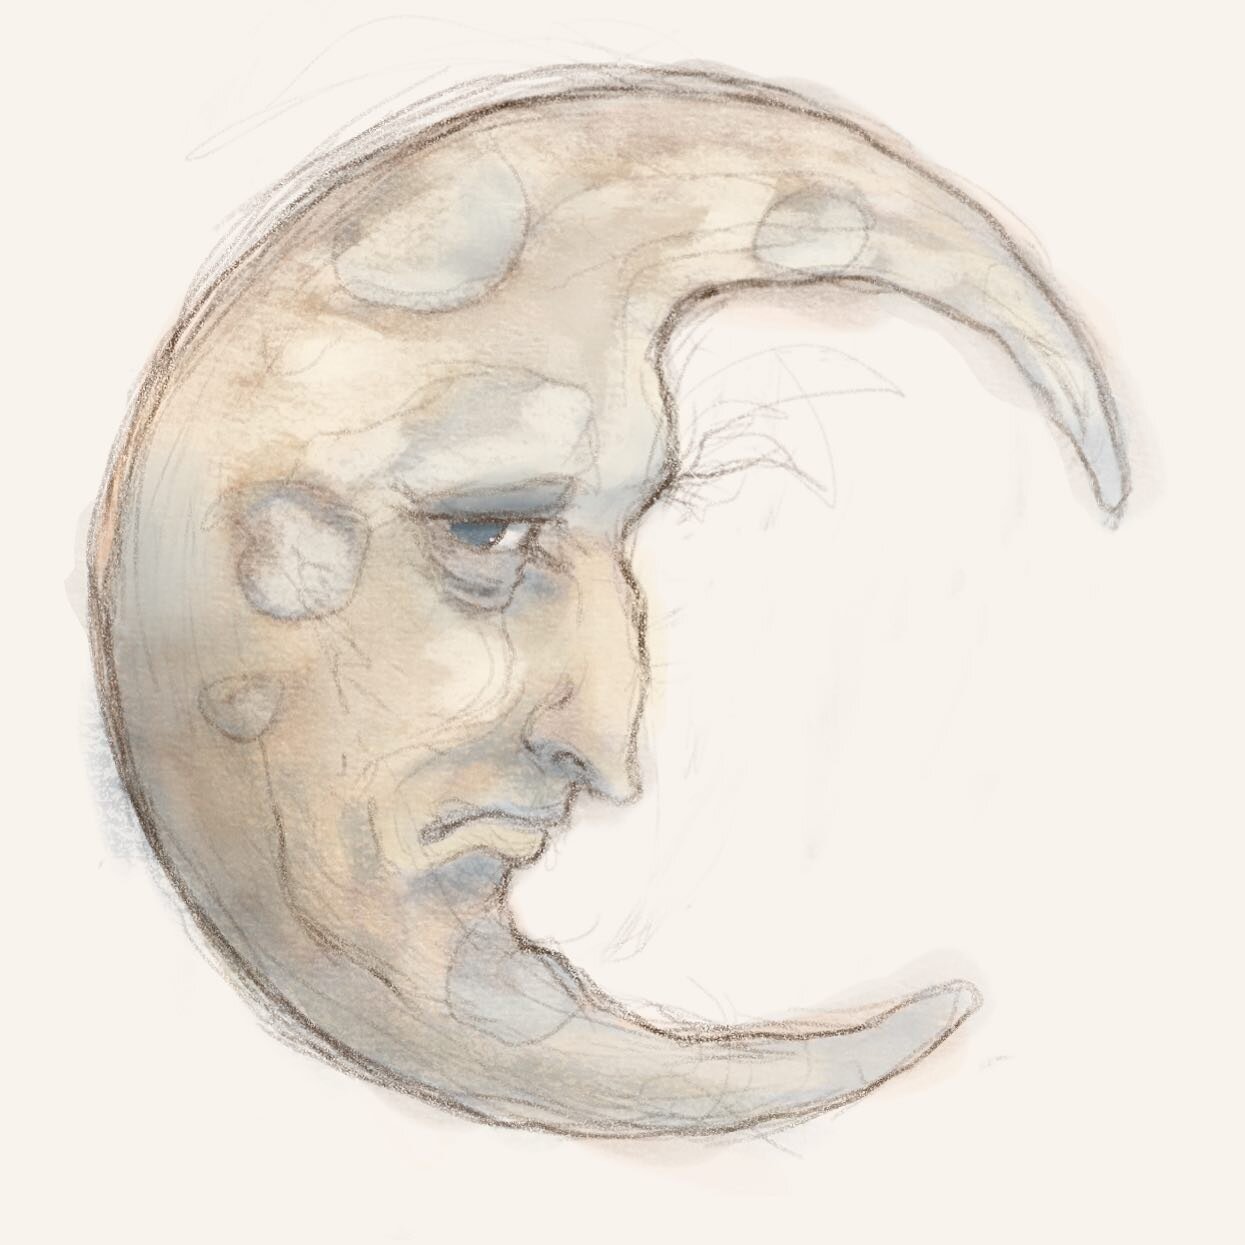 Two full moons this month!  I&rsquo;m so excited, I decided to make a lil&rsquo; moon man sketch today!  Hope you guys enjoy!